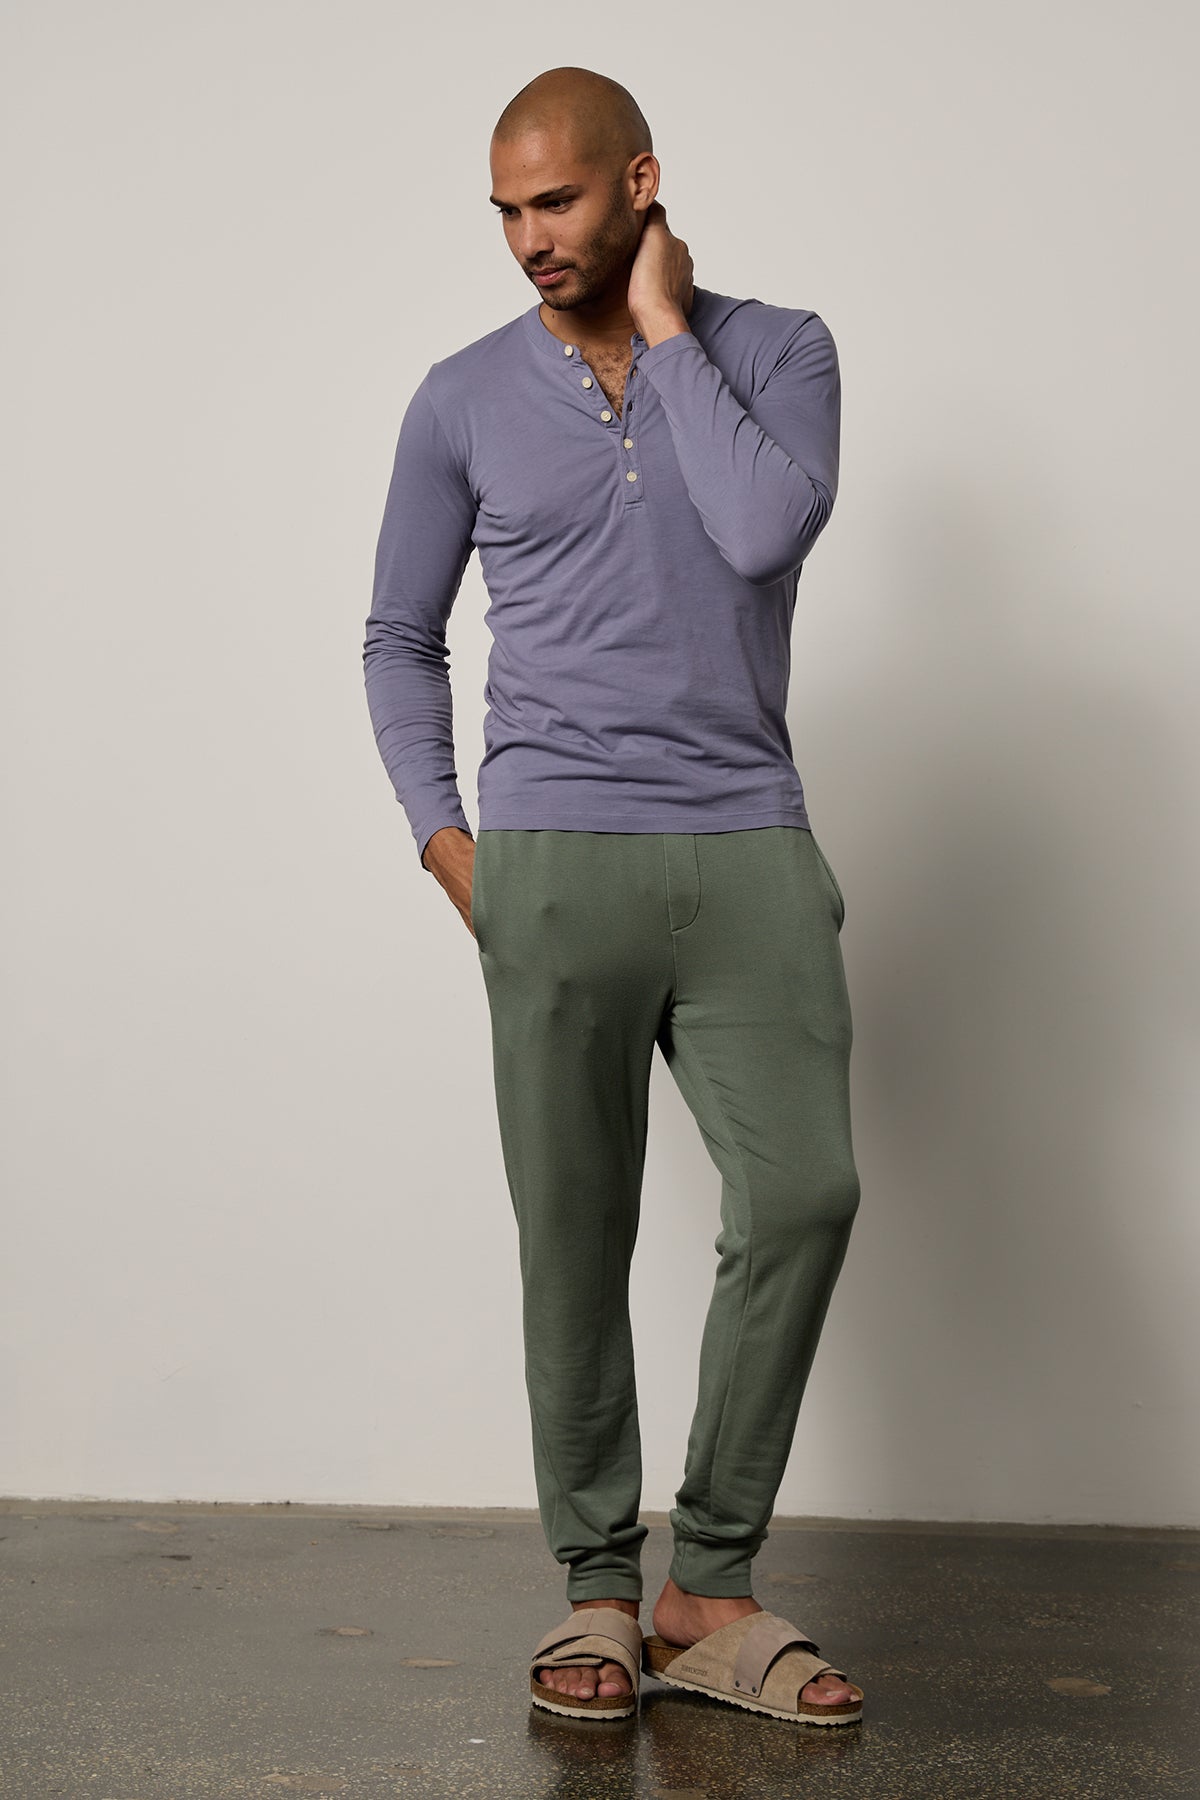   A man in a purple t-shirt and green Velvet by Graham & Spencer sweatpants for workouts, wearing the Crosby Luxe Fleece Jogger. 